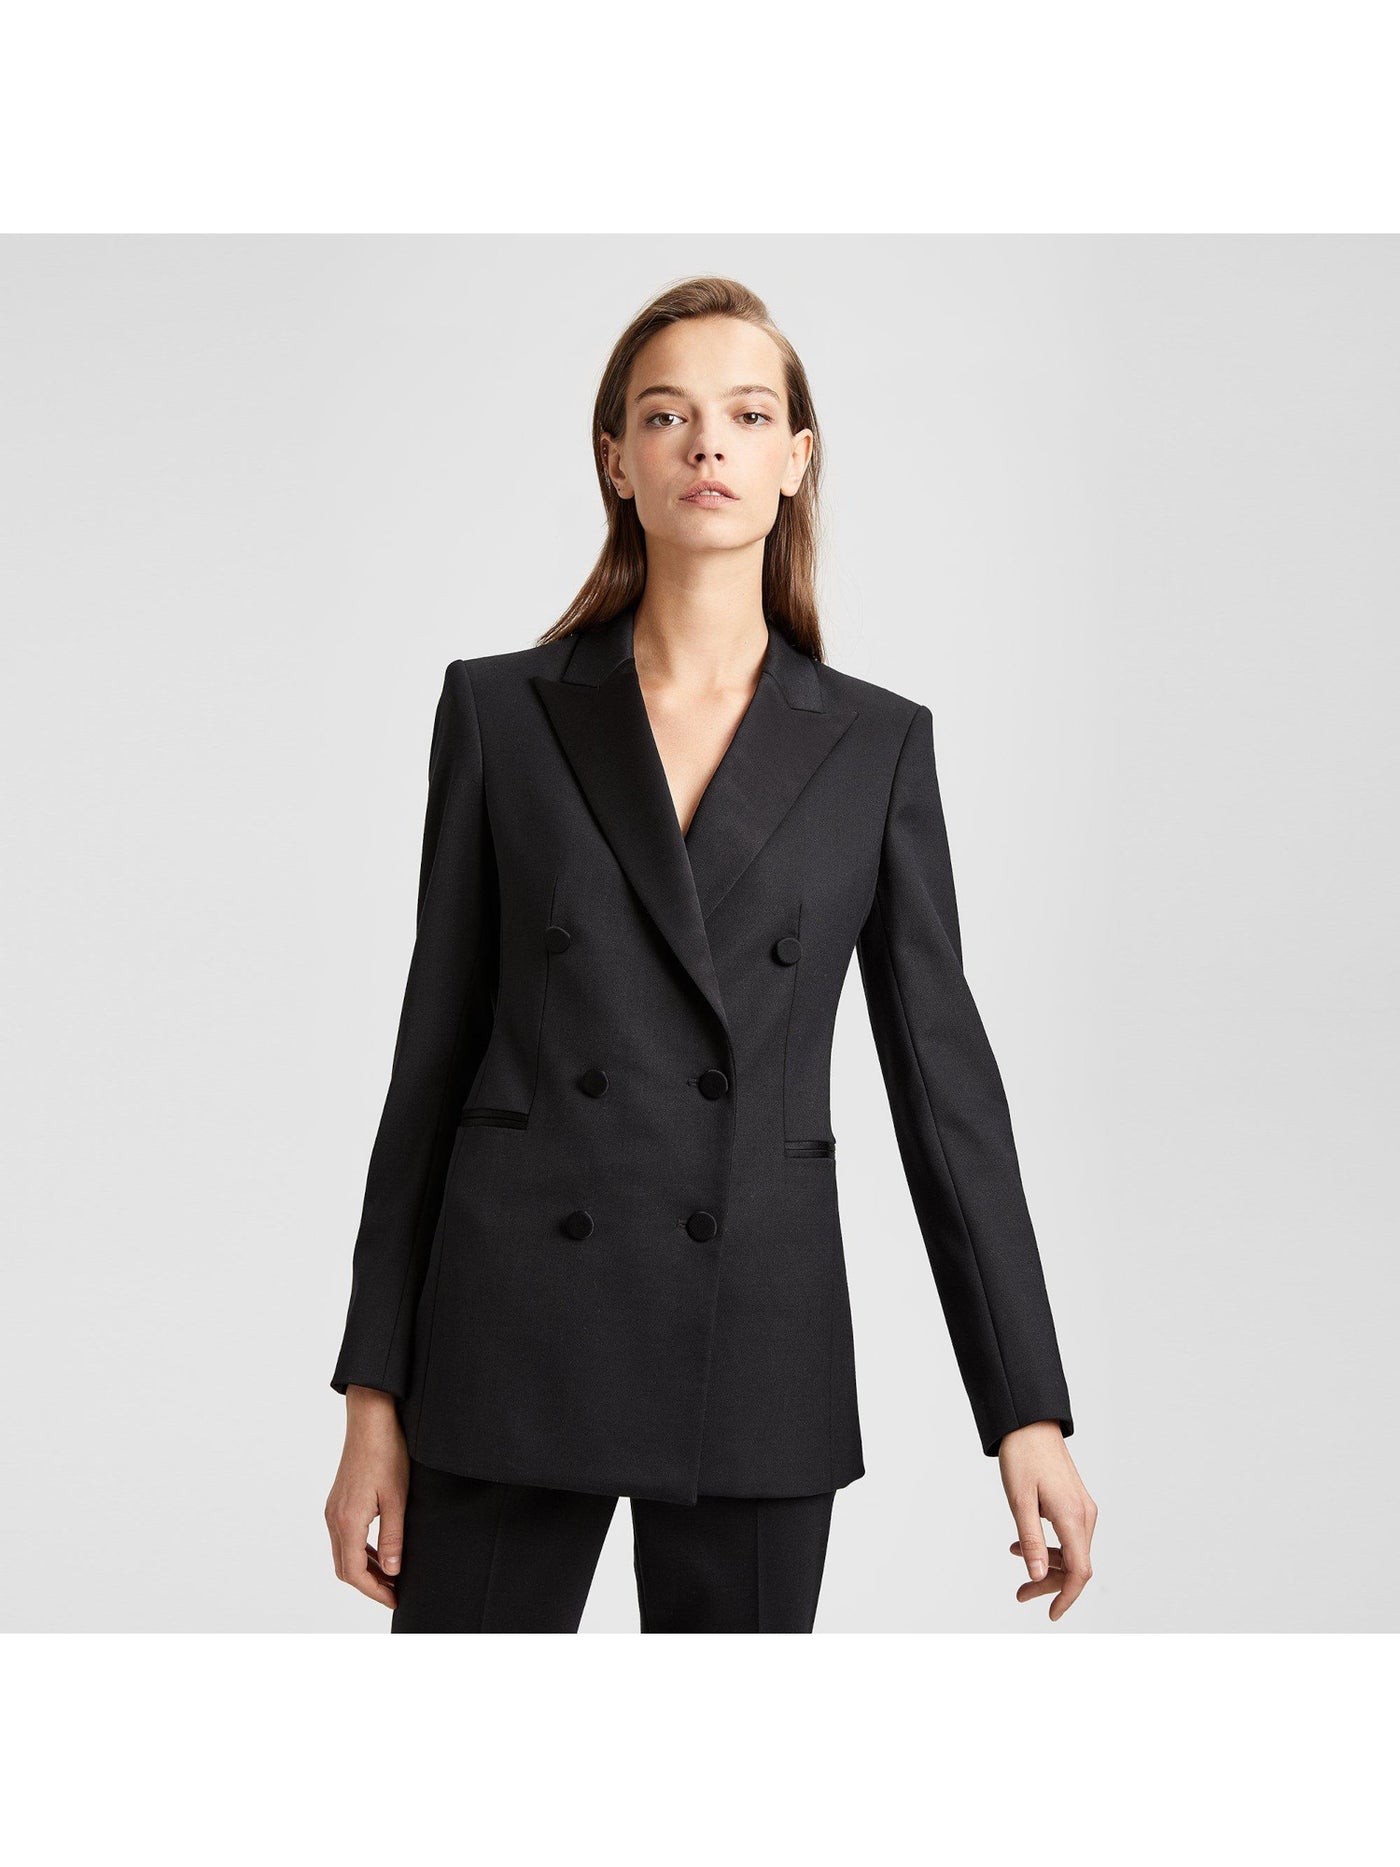 THEORY Womens Black Pocketed Lined Double Breasted Tuxedo-inspired Wear To Work Suit Jacket 0